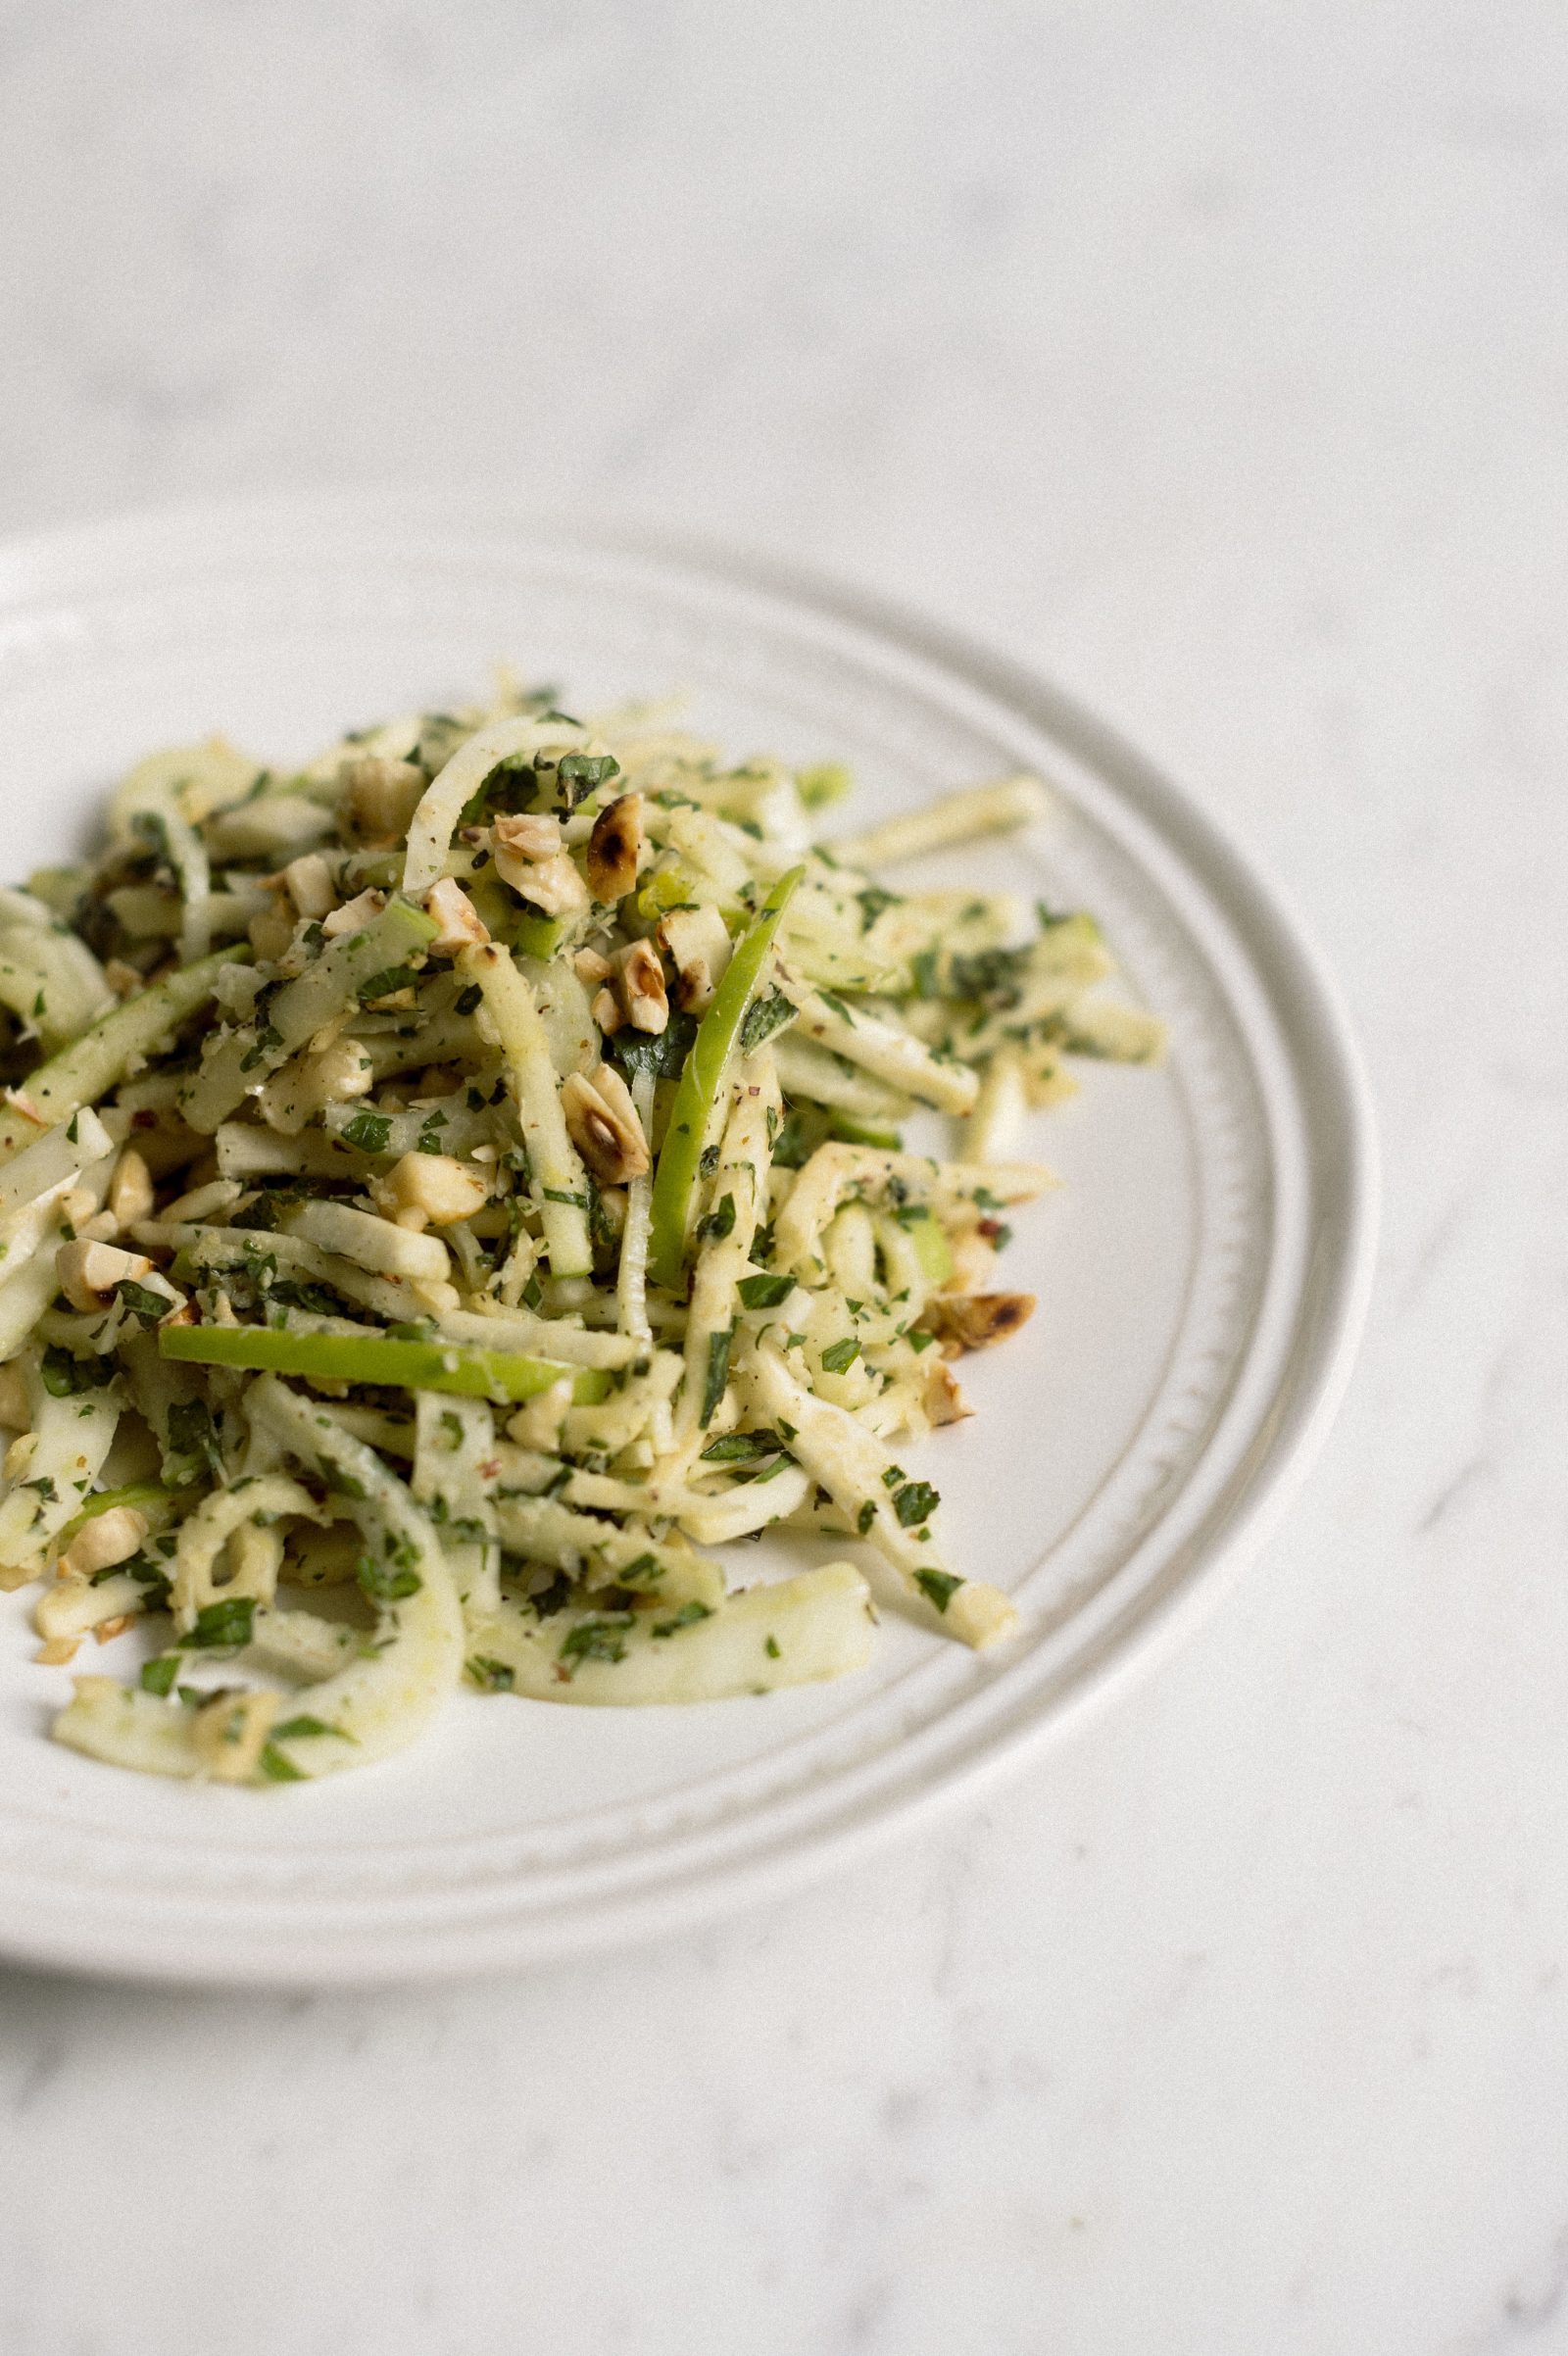 Apple, Celery Root and Fennel Salad with Hazelnuts